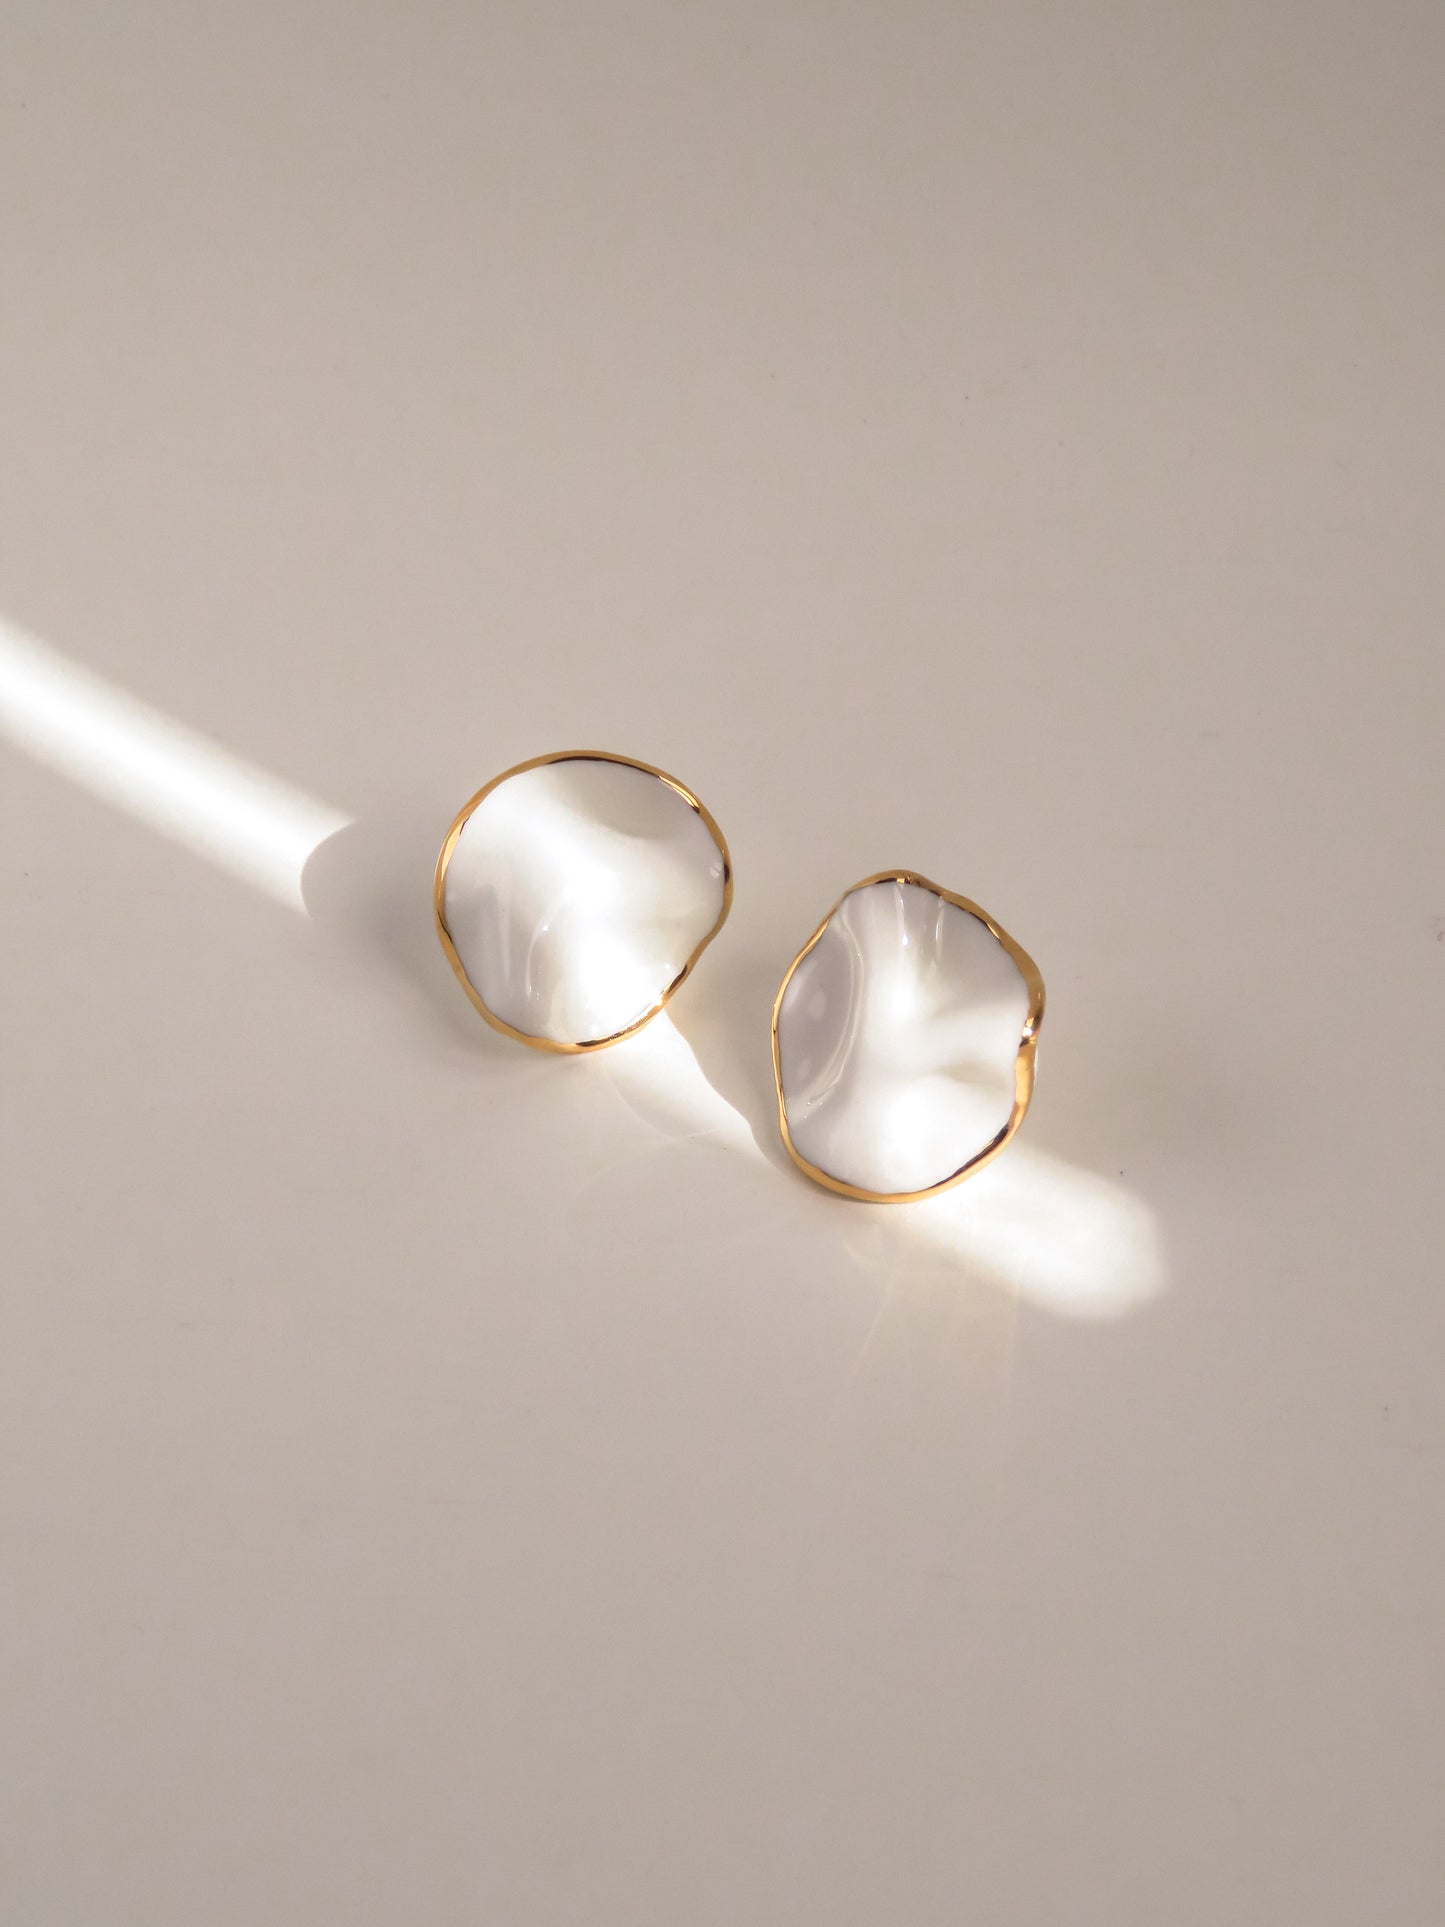 Round white and gold hammered porcelain earrings by Nina Bosch Jewellery